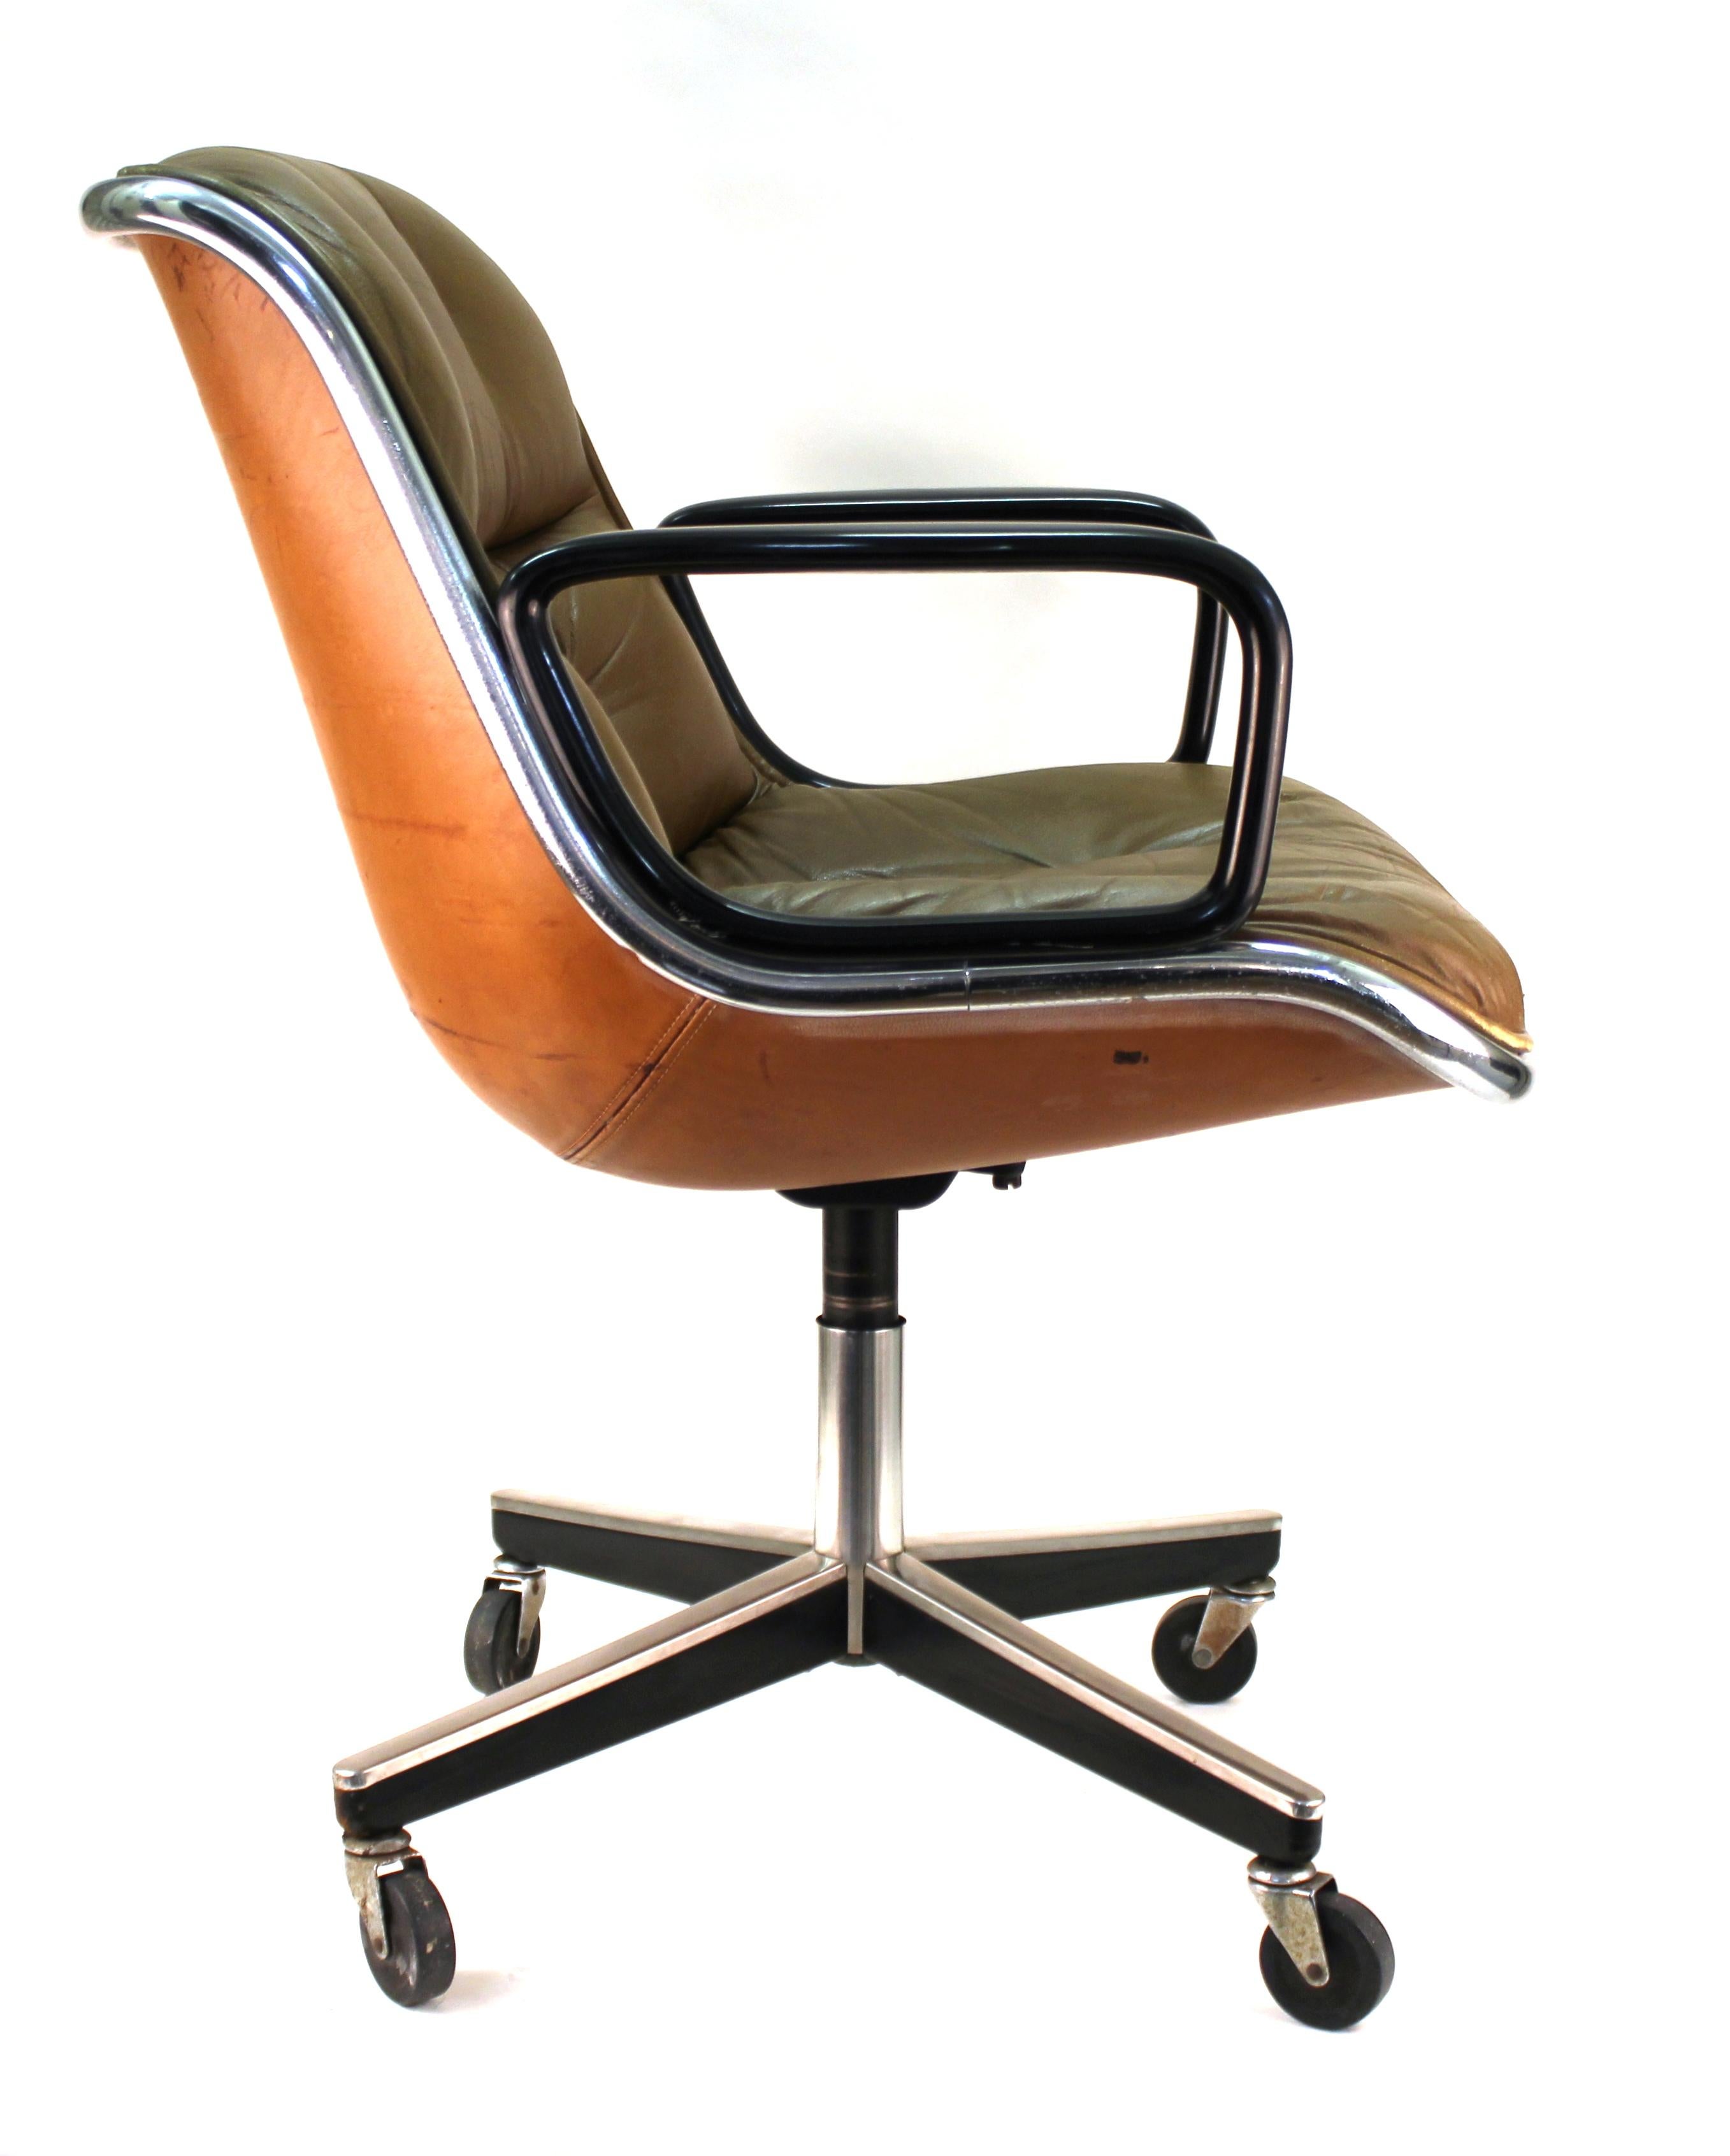 American Charles Pollock for Knoll Mid-Century Modern Executive Chair